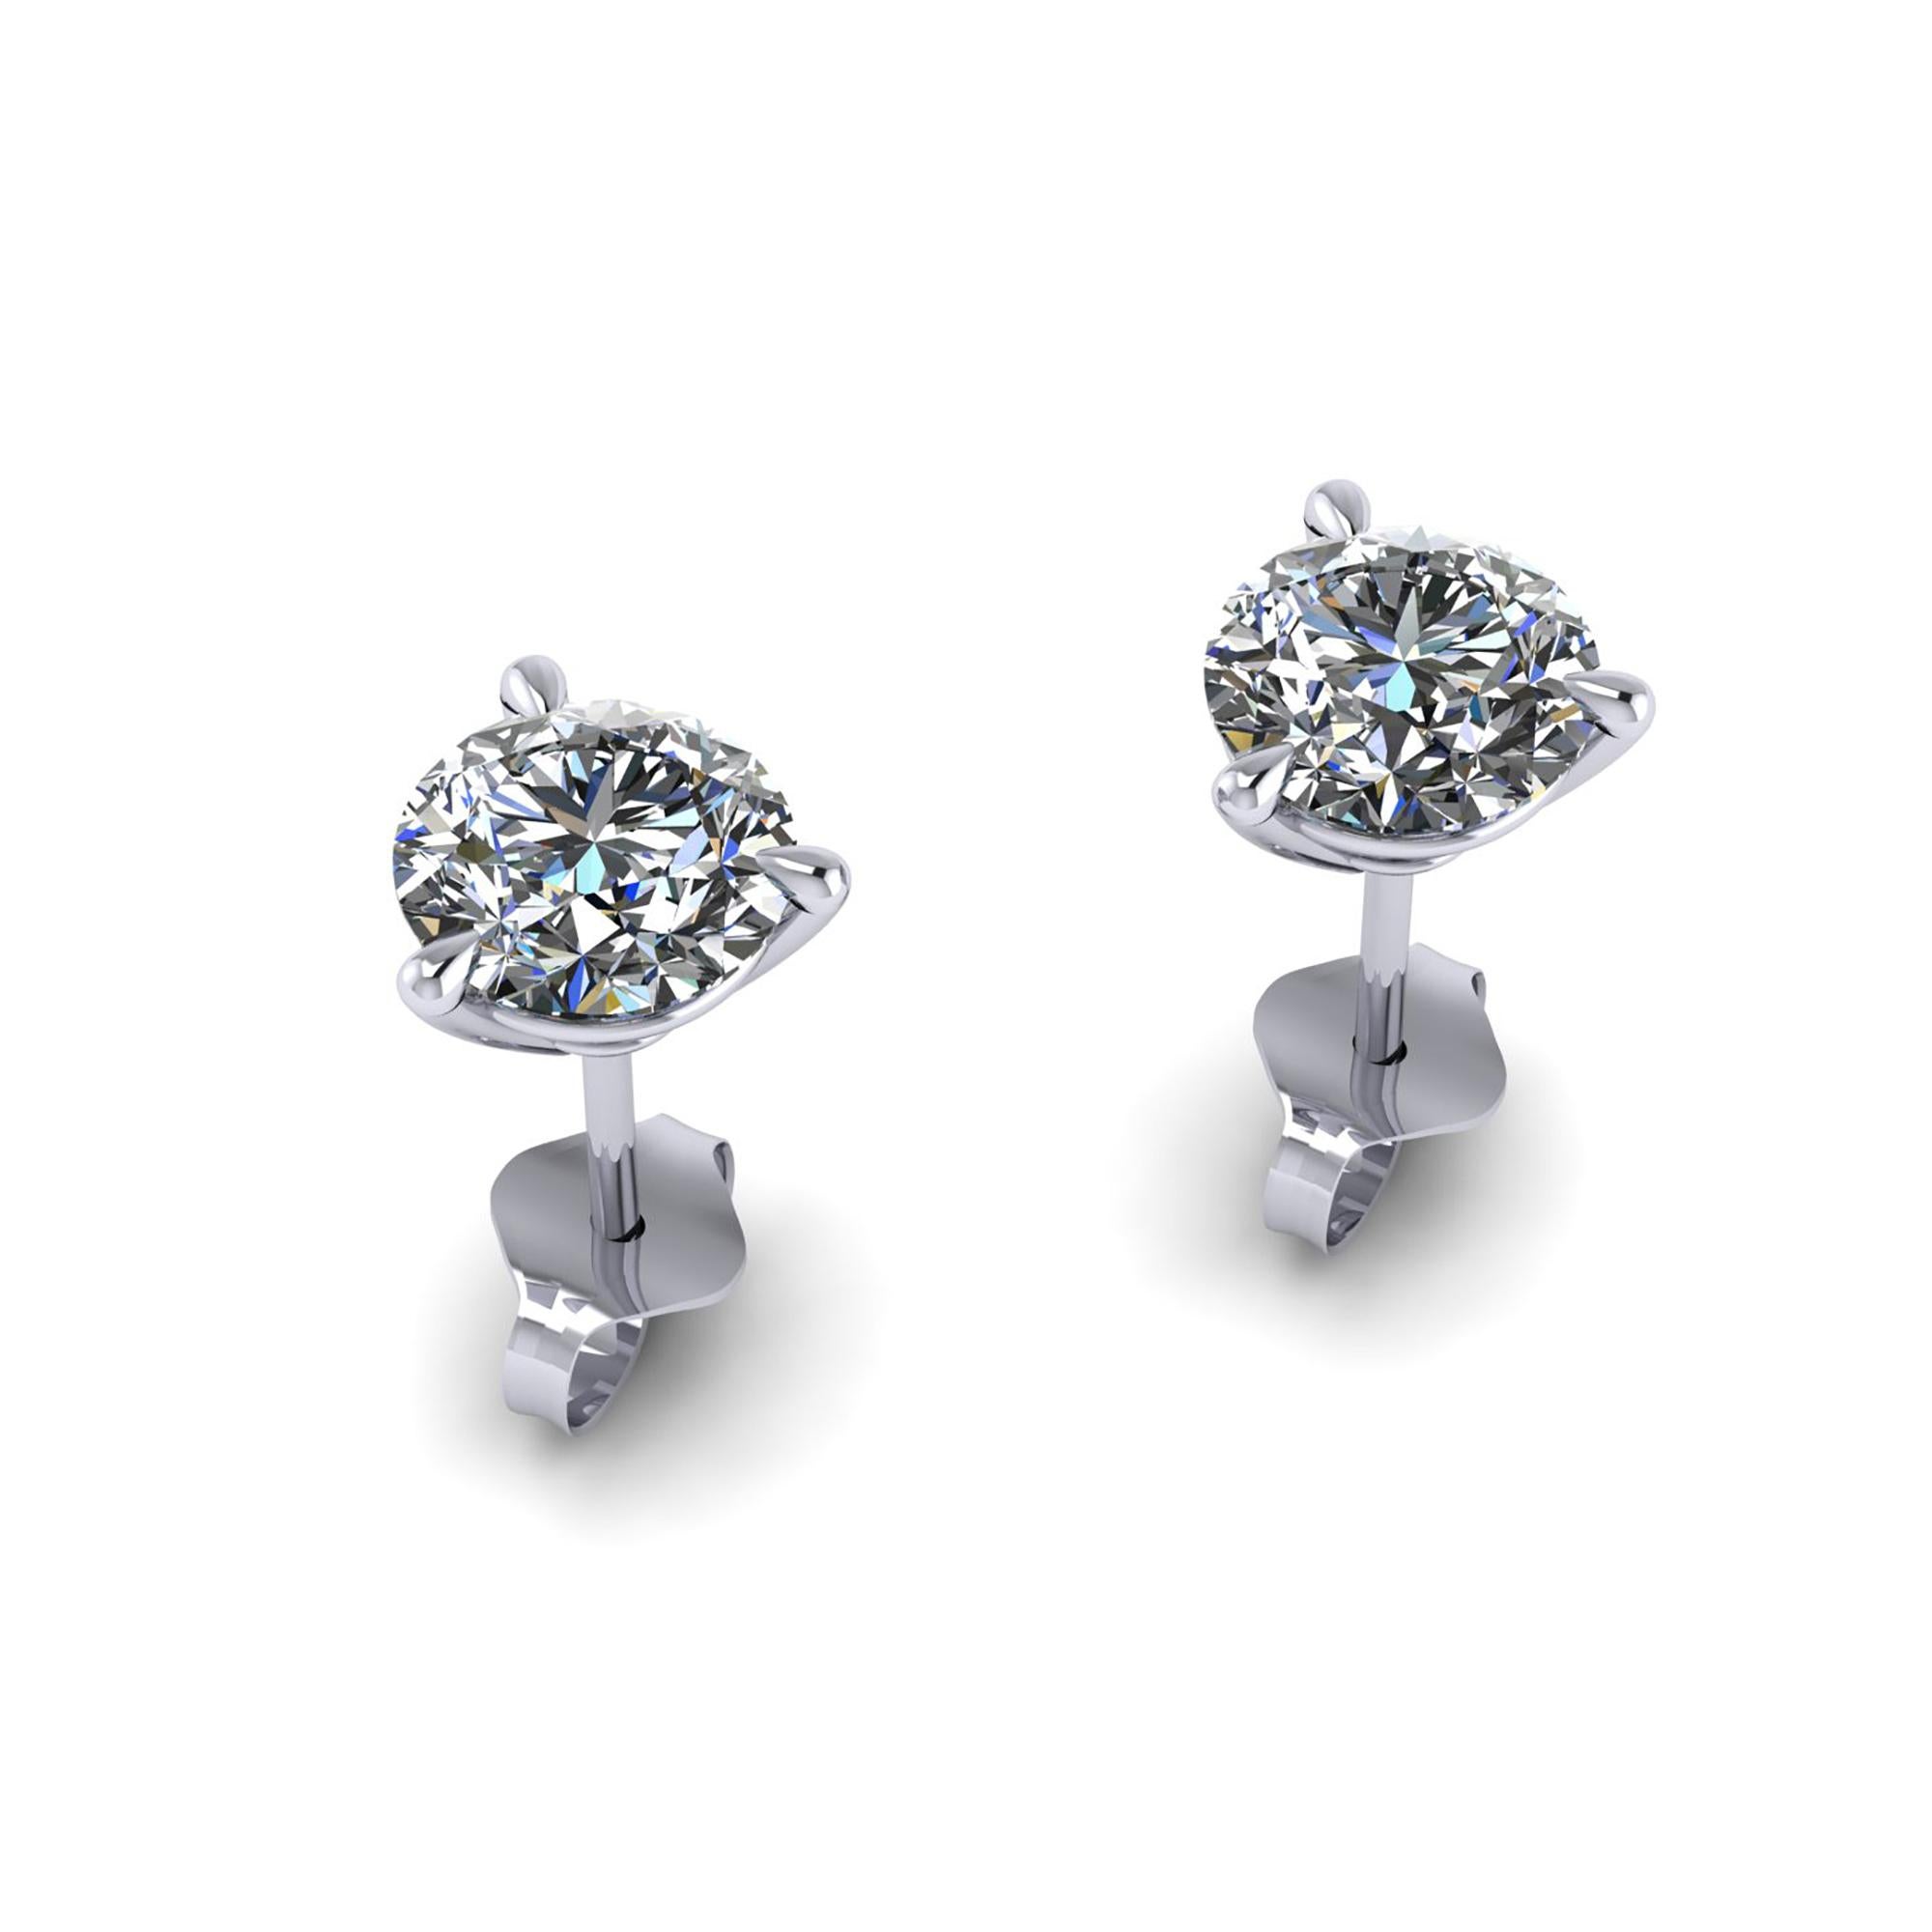 GIA Certified 2.14 Carat total, Round Diamonds D color, VVS2 clarity and VS2Triple Excellent Specs,  Martini Studs made in Platinum in New York by Italian designer, Low setting style, pret-a-porter, easy to wear, ideal for every woman from office to